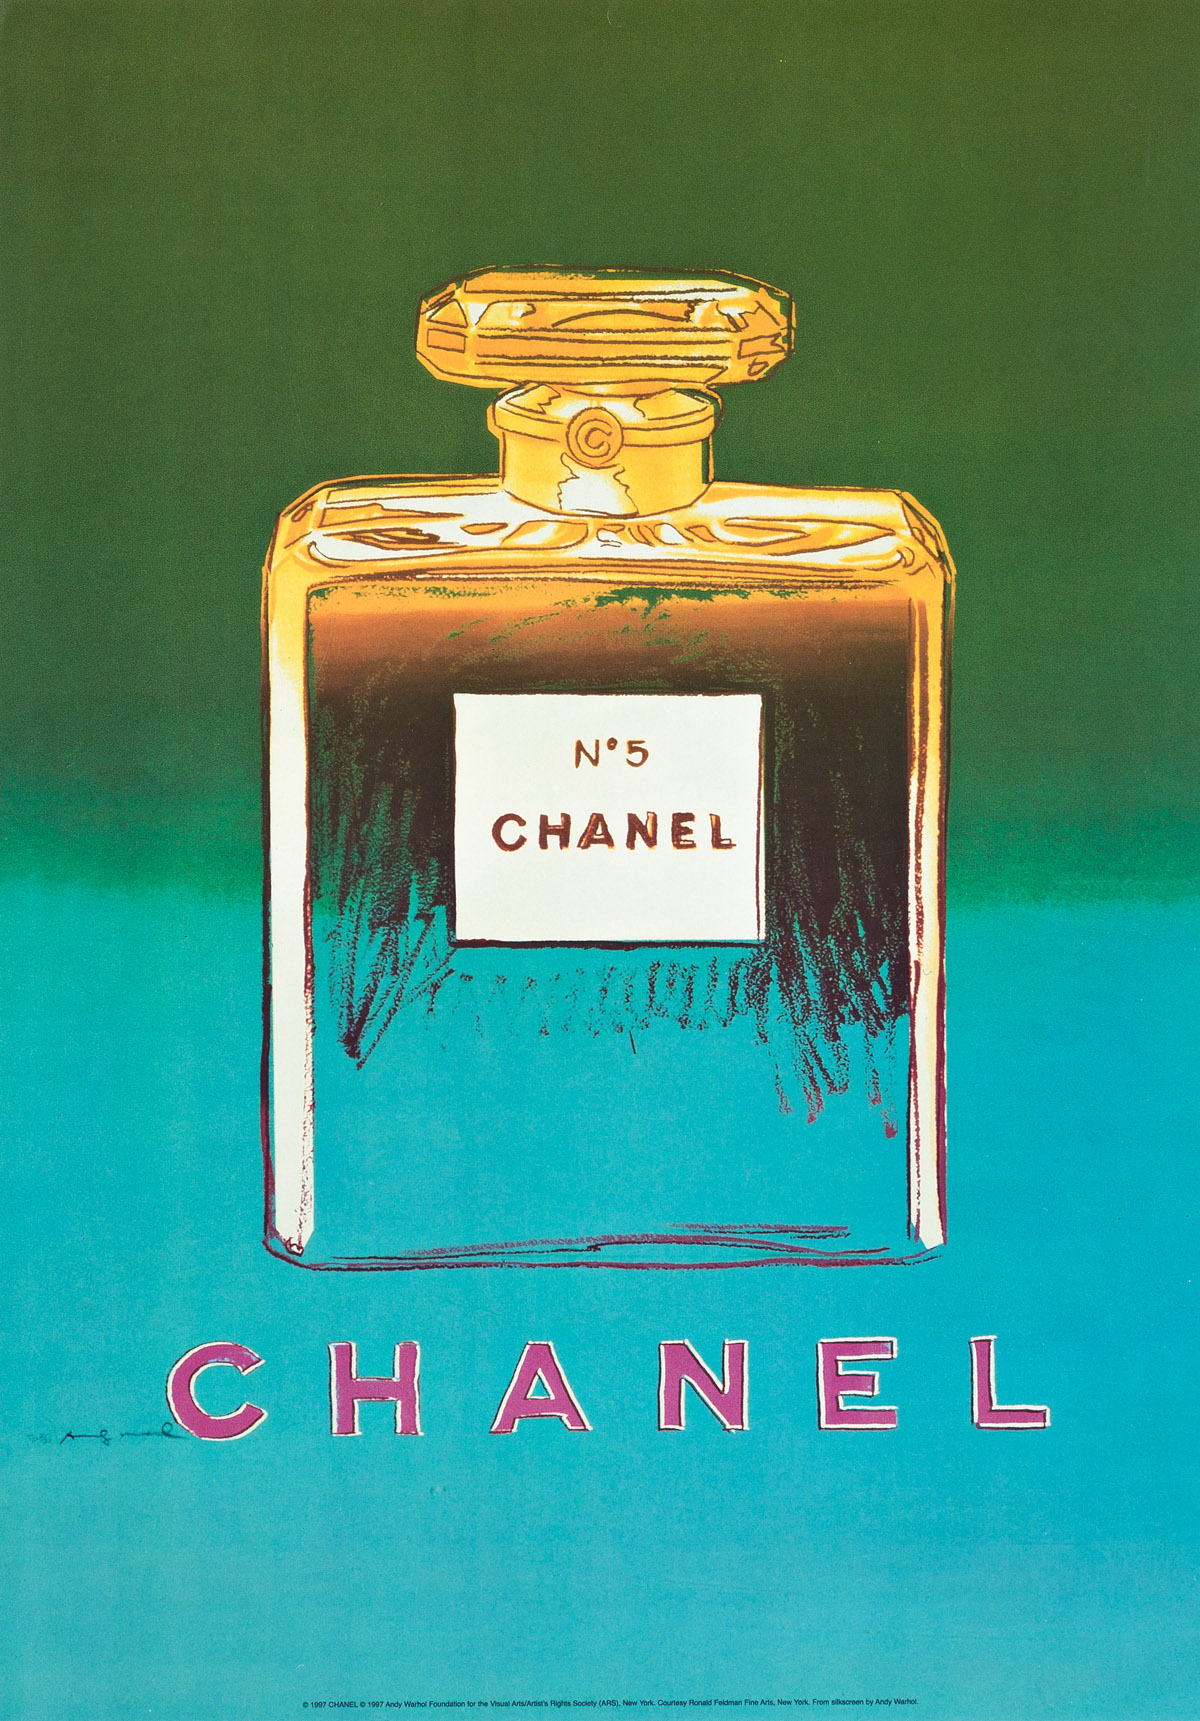 ANDY WARHOL (AFTER) Two Chanel No 5 prints